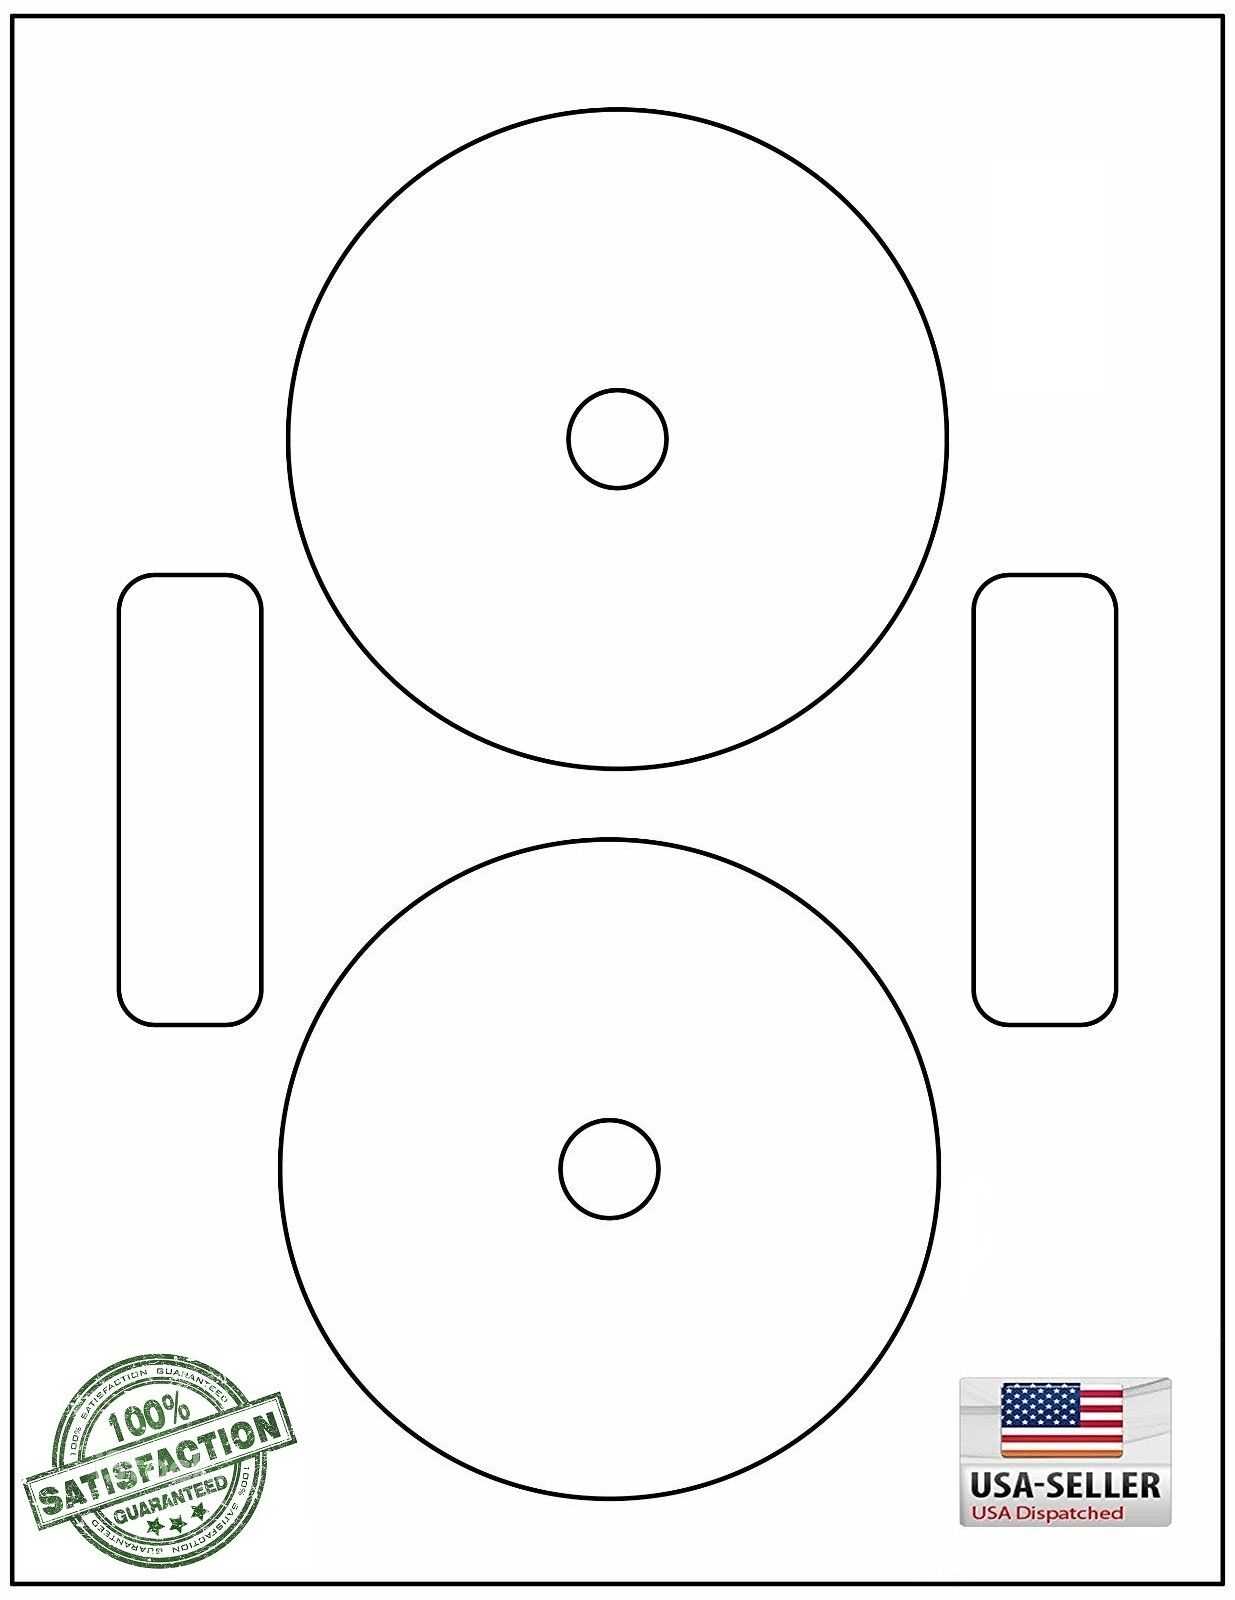 200 Neato Compatible Cd/dvd Labels, Matte White Laser Inkjet / 100 Sheets Pertaining To Fellowes Neato Cd Label Template